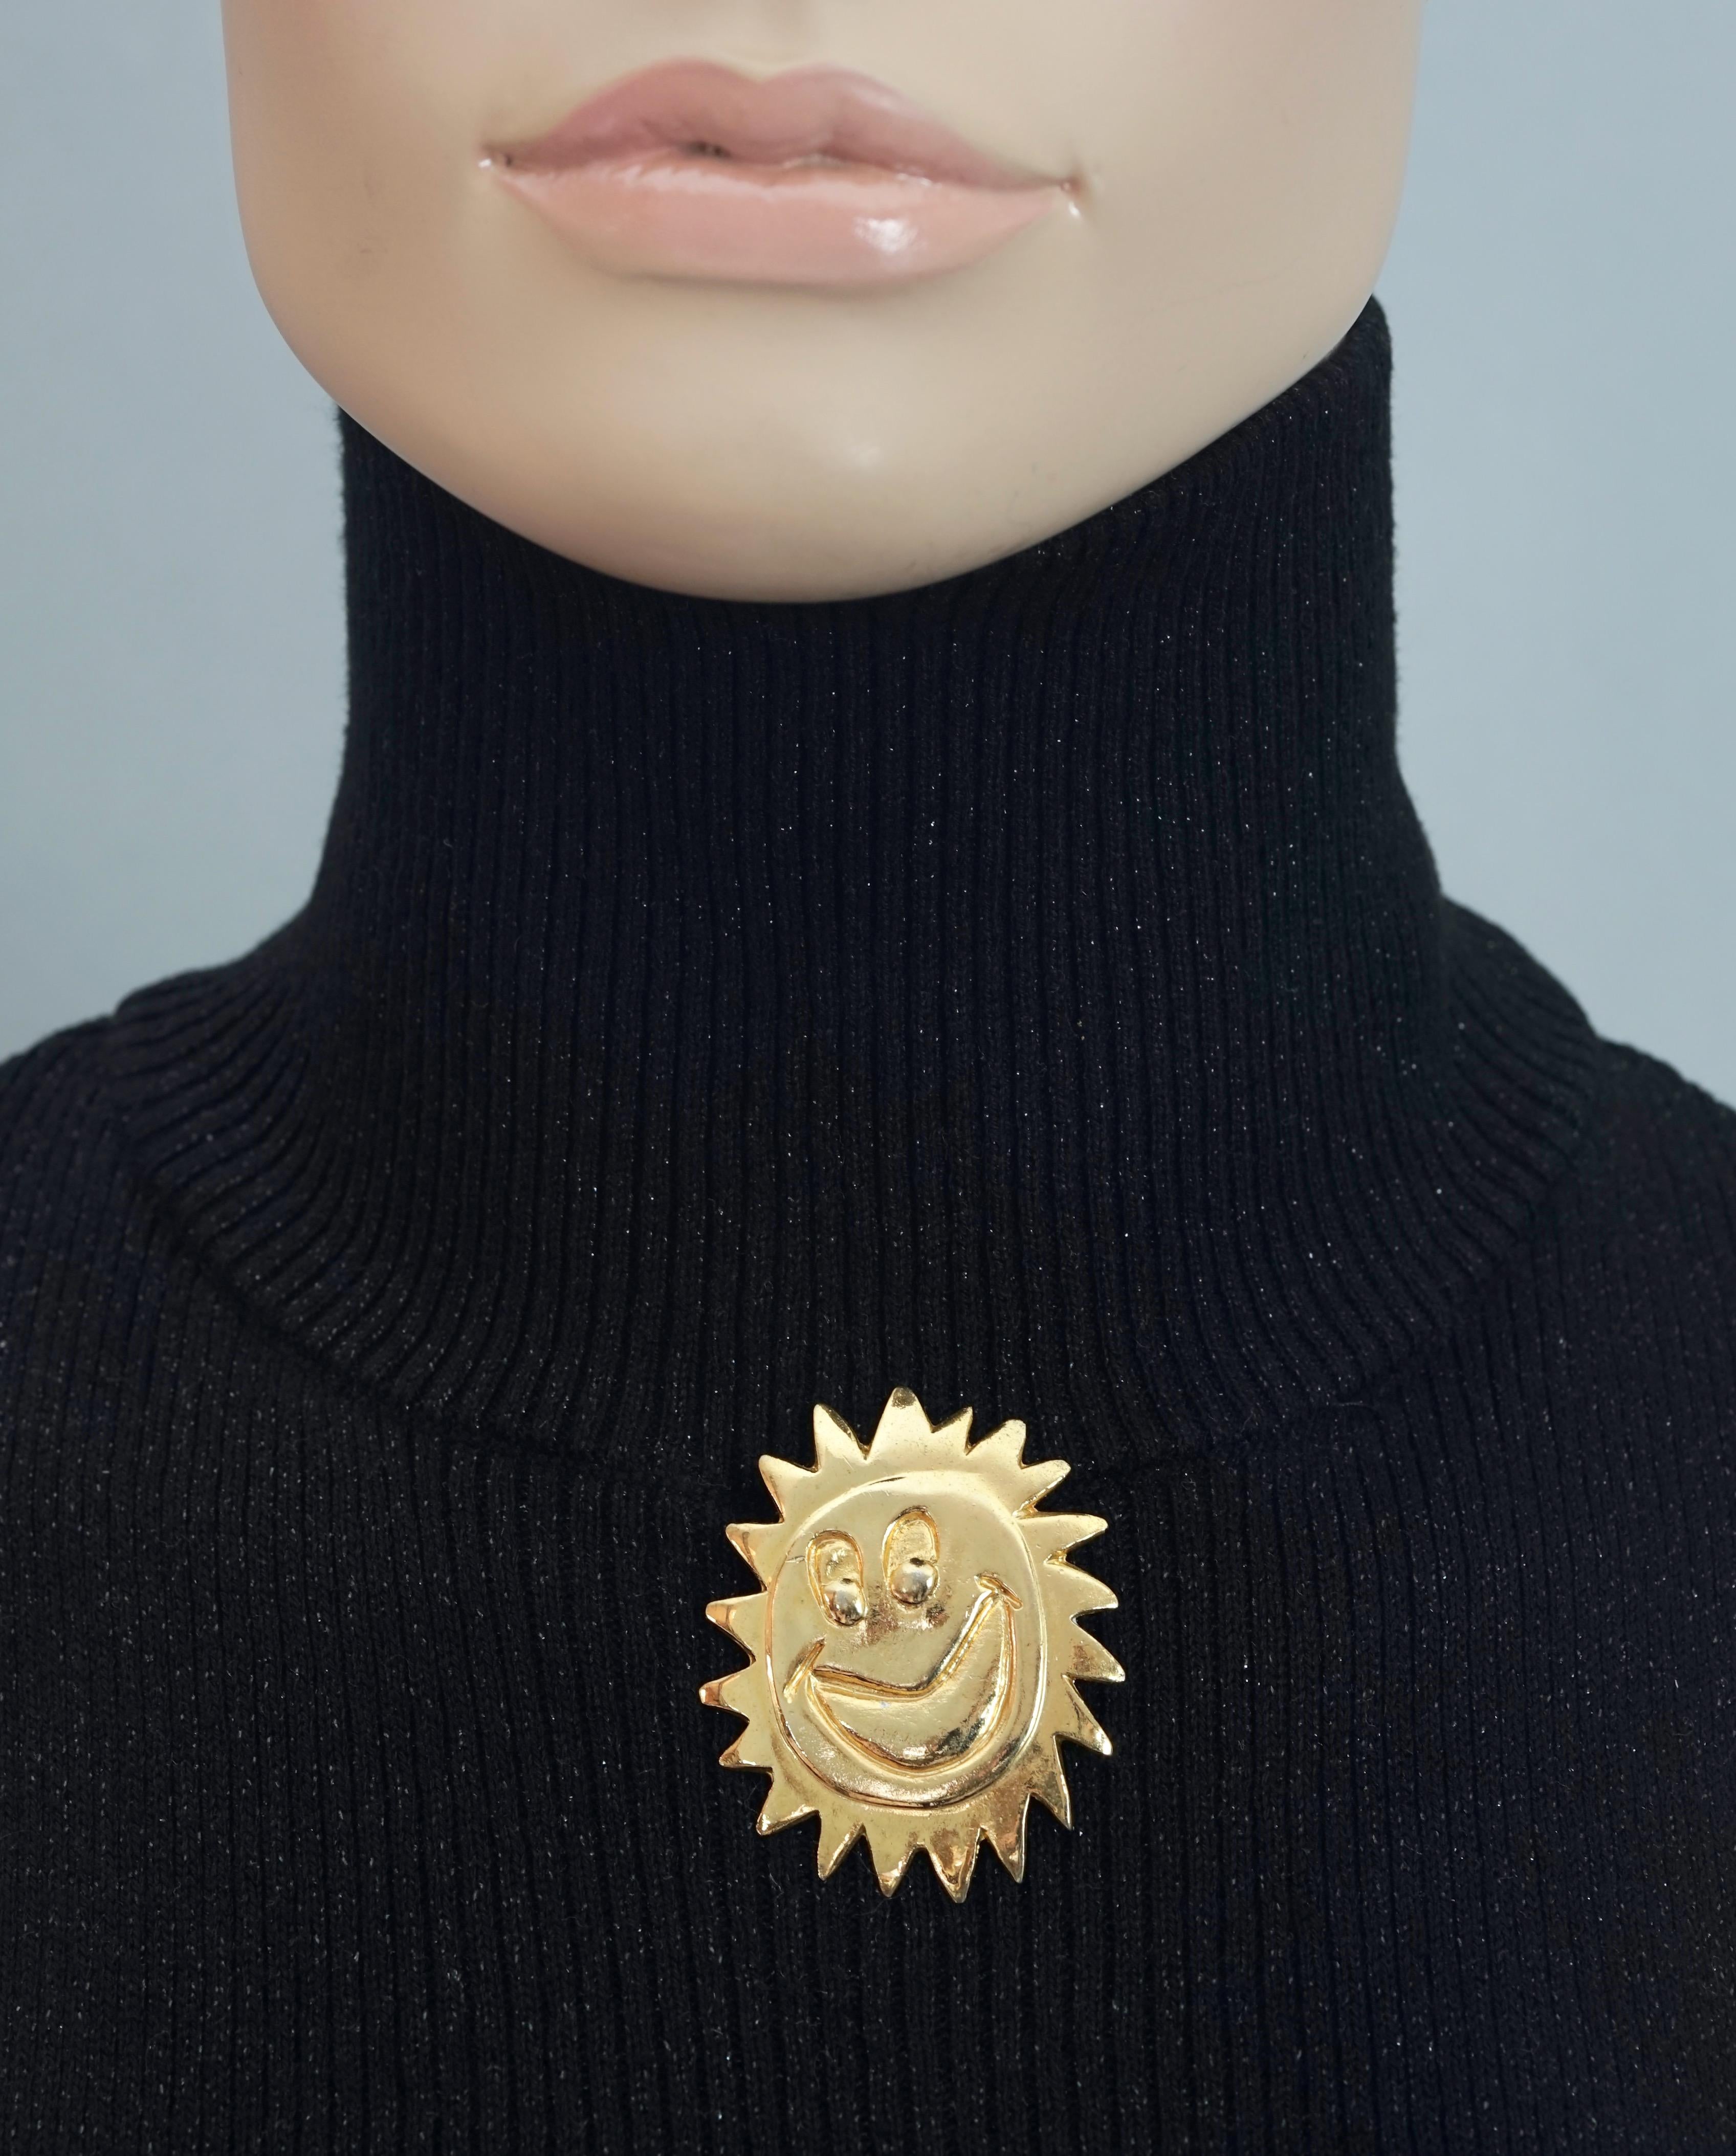 Vintage 1987 BILLY BOY Surreal Smiley Sun Face Brooch

Measurements:
Height: 1.97 inches (5 cm)
Width: 1.61 inches (4.1 cm)

Features:
- 100% Authentic 1987 BILLY BOY.
- Textured surreal smiley sun face brooch.
- Gold tone.
- Signed 1987 BILLY BOY